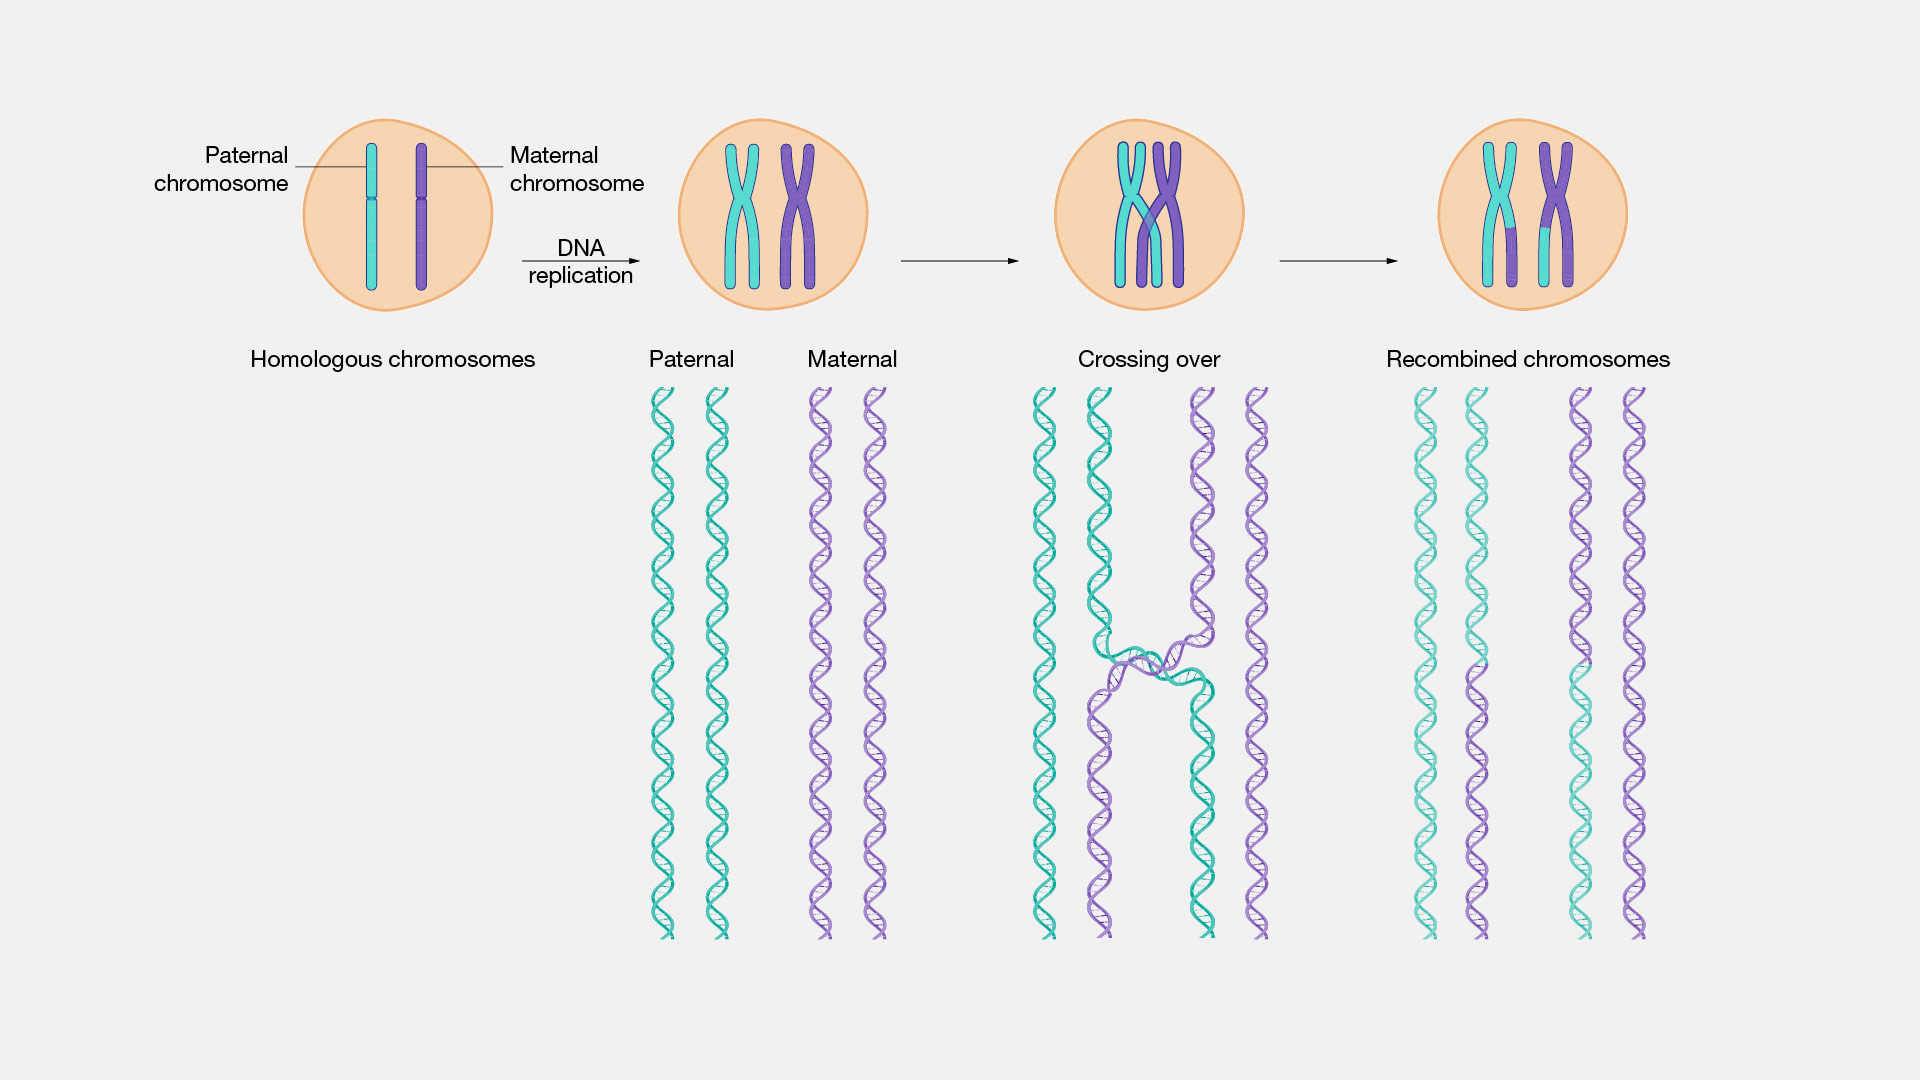 what is the importance of crossing over in meiosis